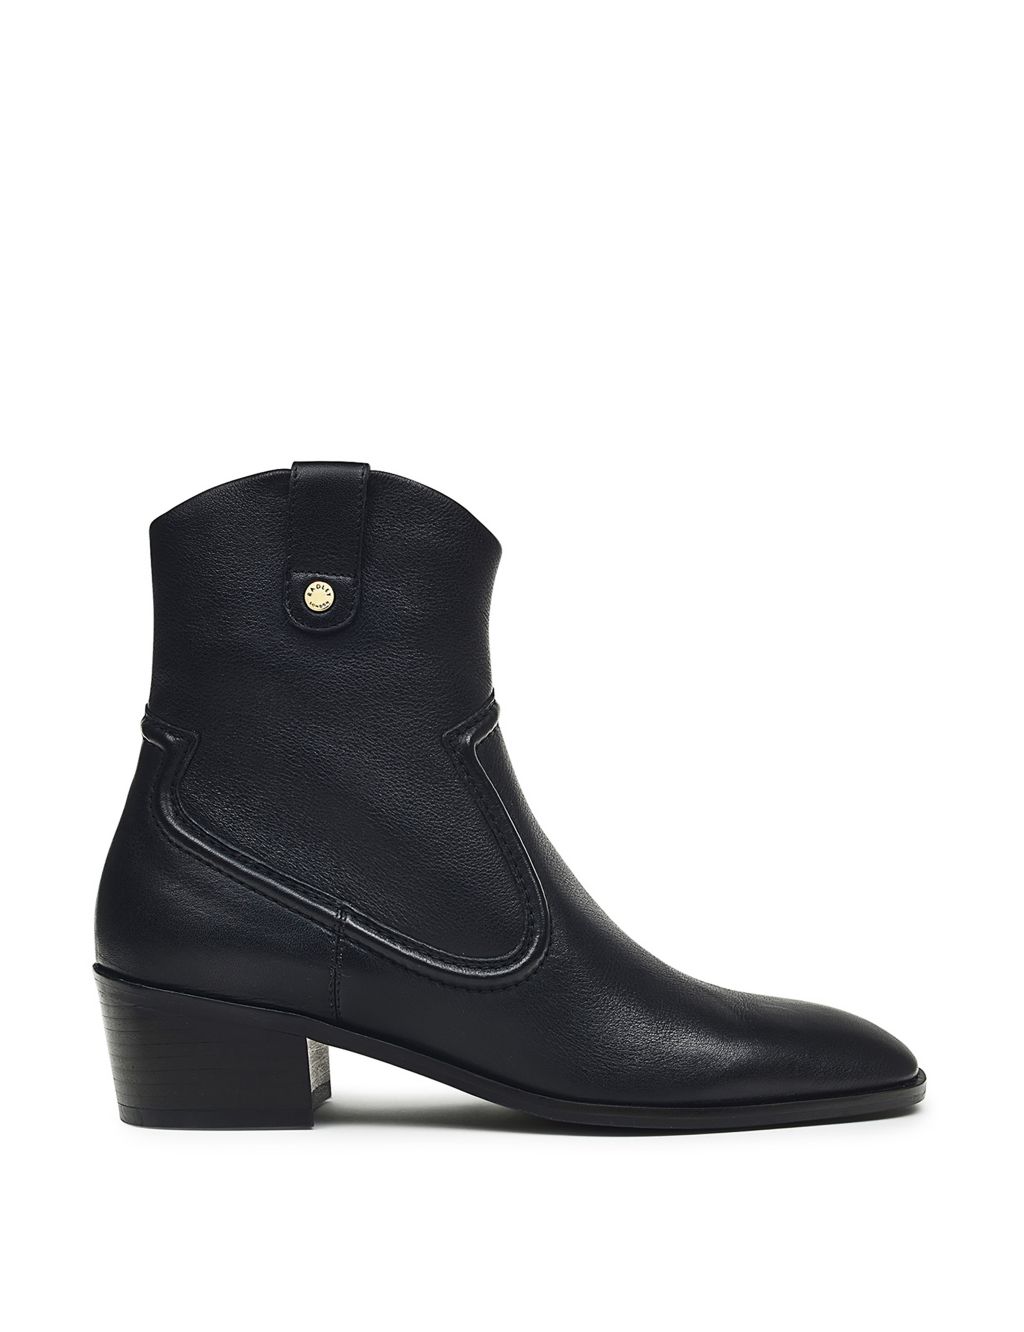 Leather Block Heel Ankle Boots image 2